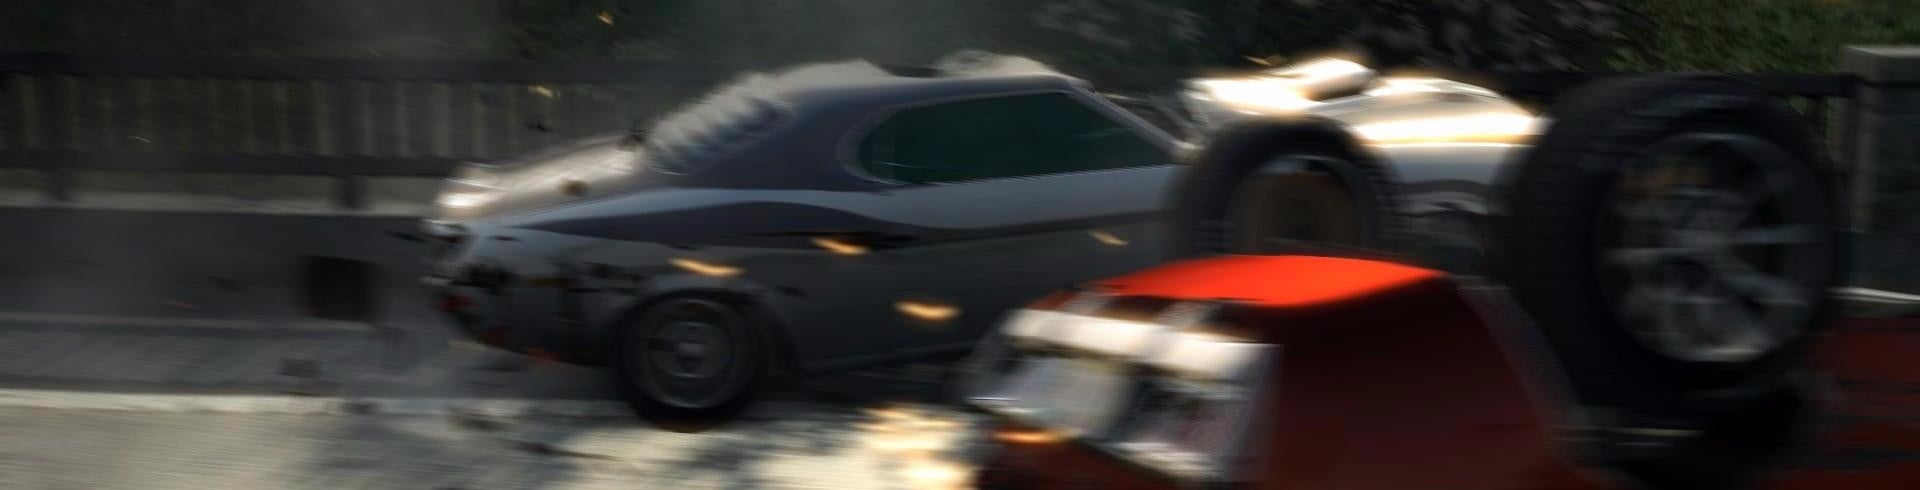 Image for Burnout Paradise is gaming perfection